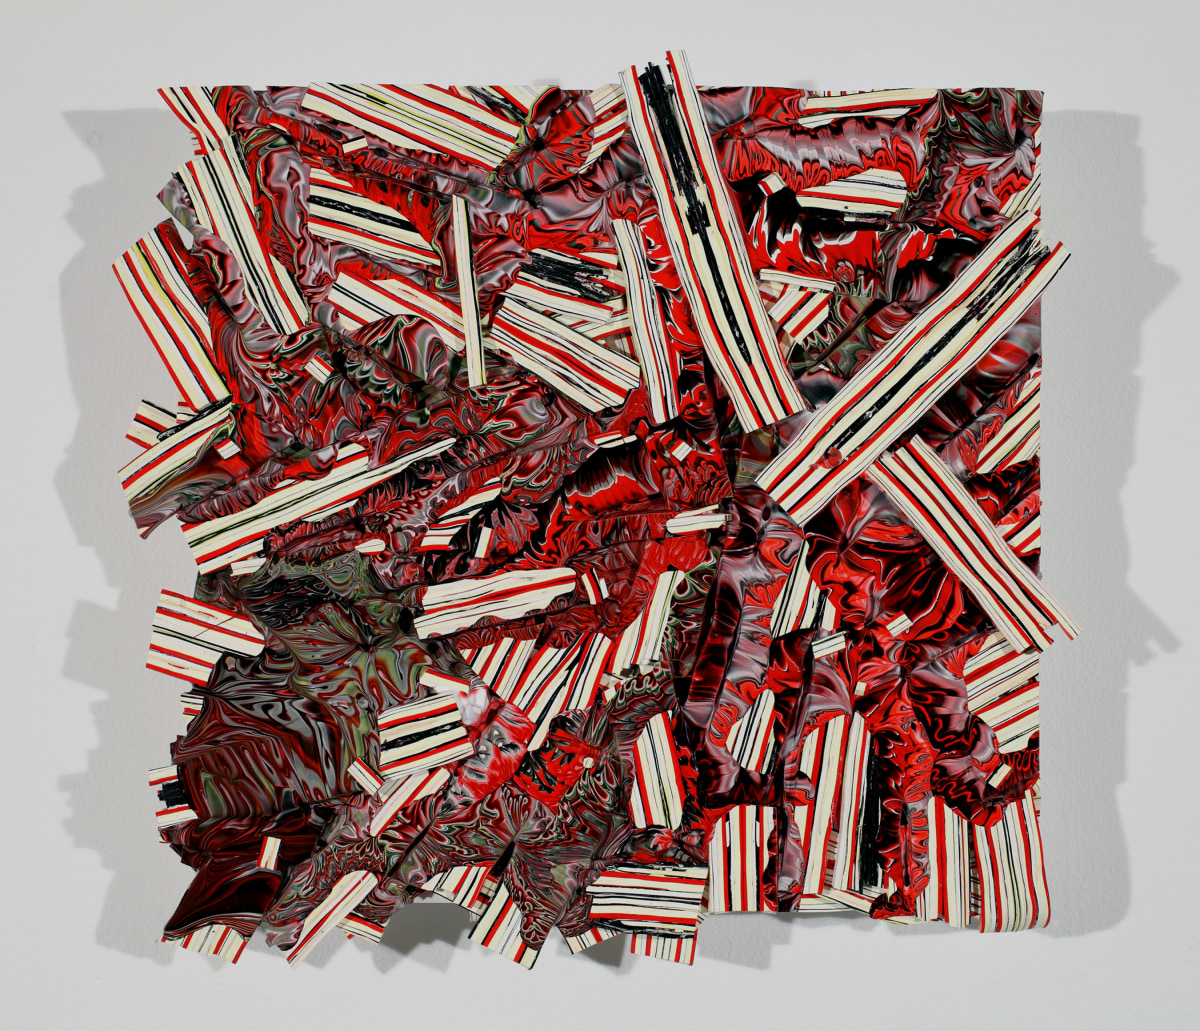 Margie Livingston Red Pour on Waferboard, Small, 2013 Acrylic paint, Alupanel 13 x 13 x 1.5 in